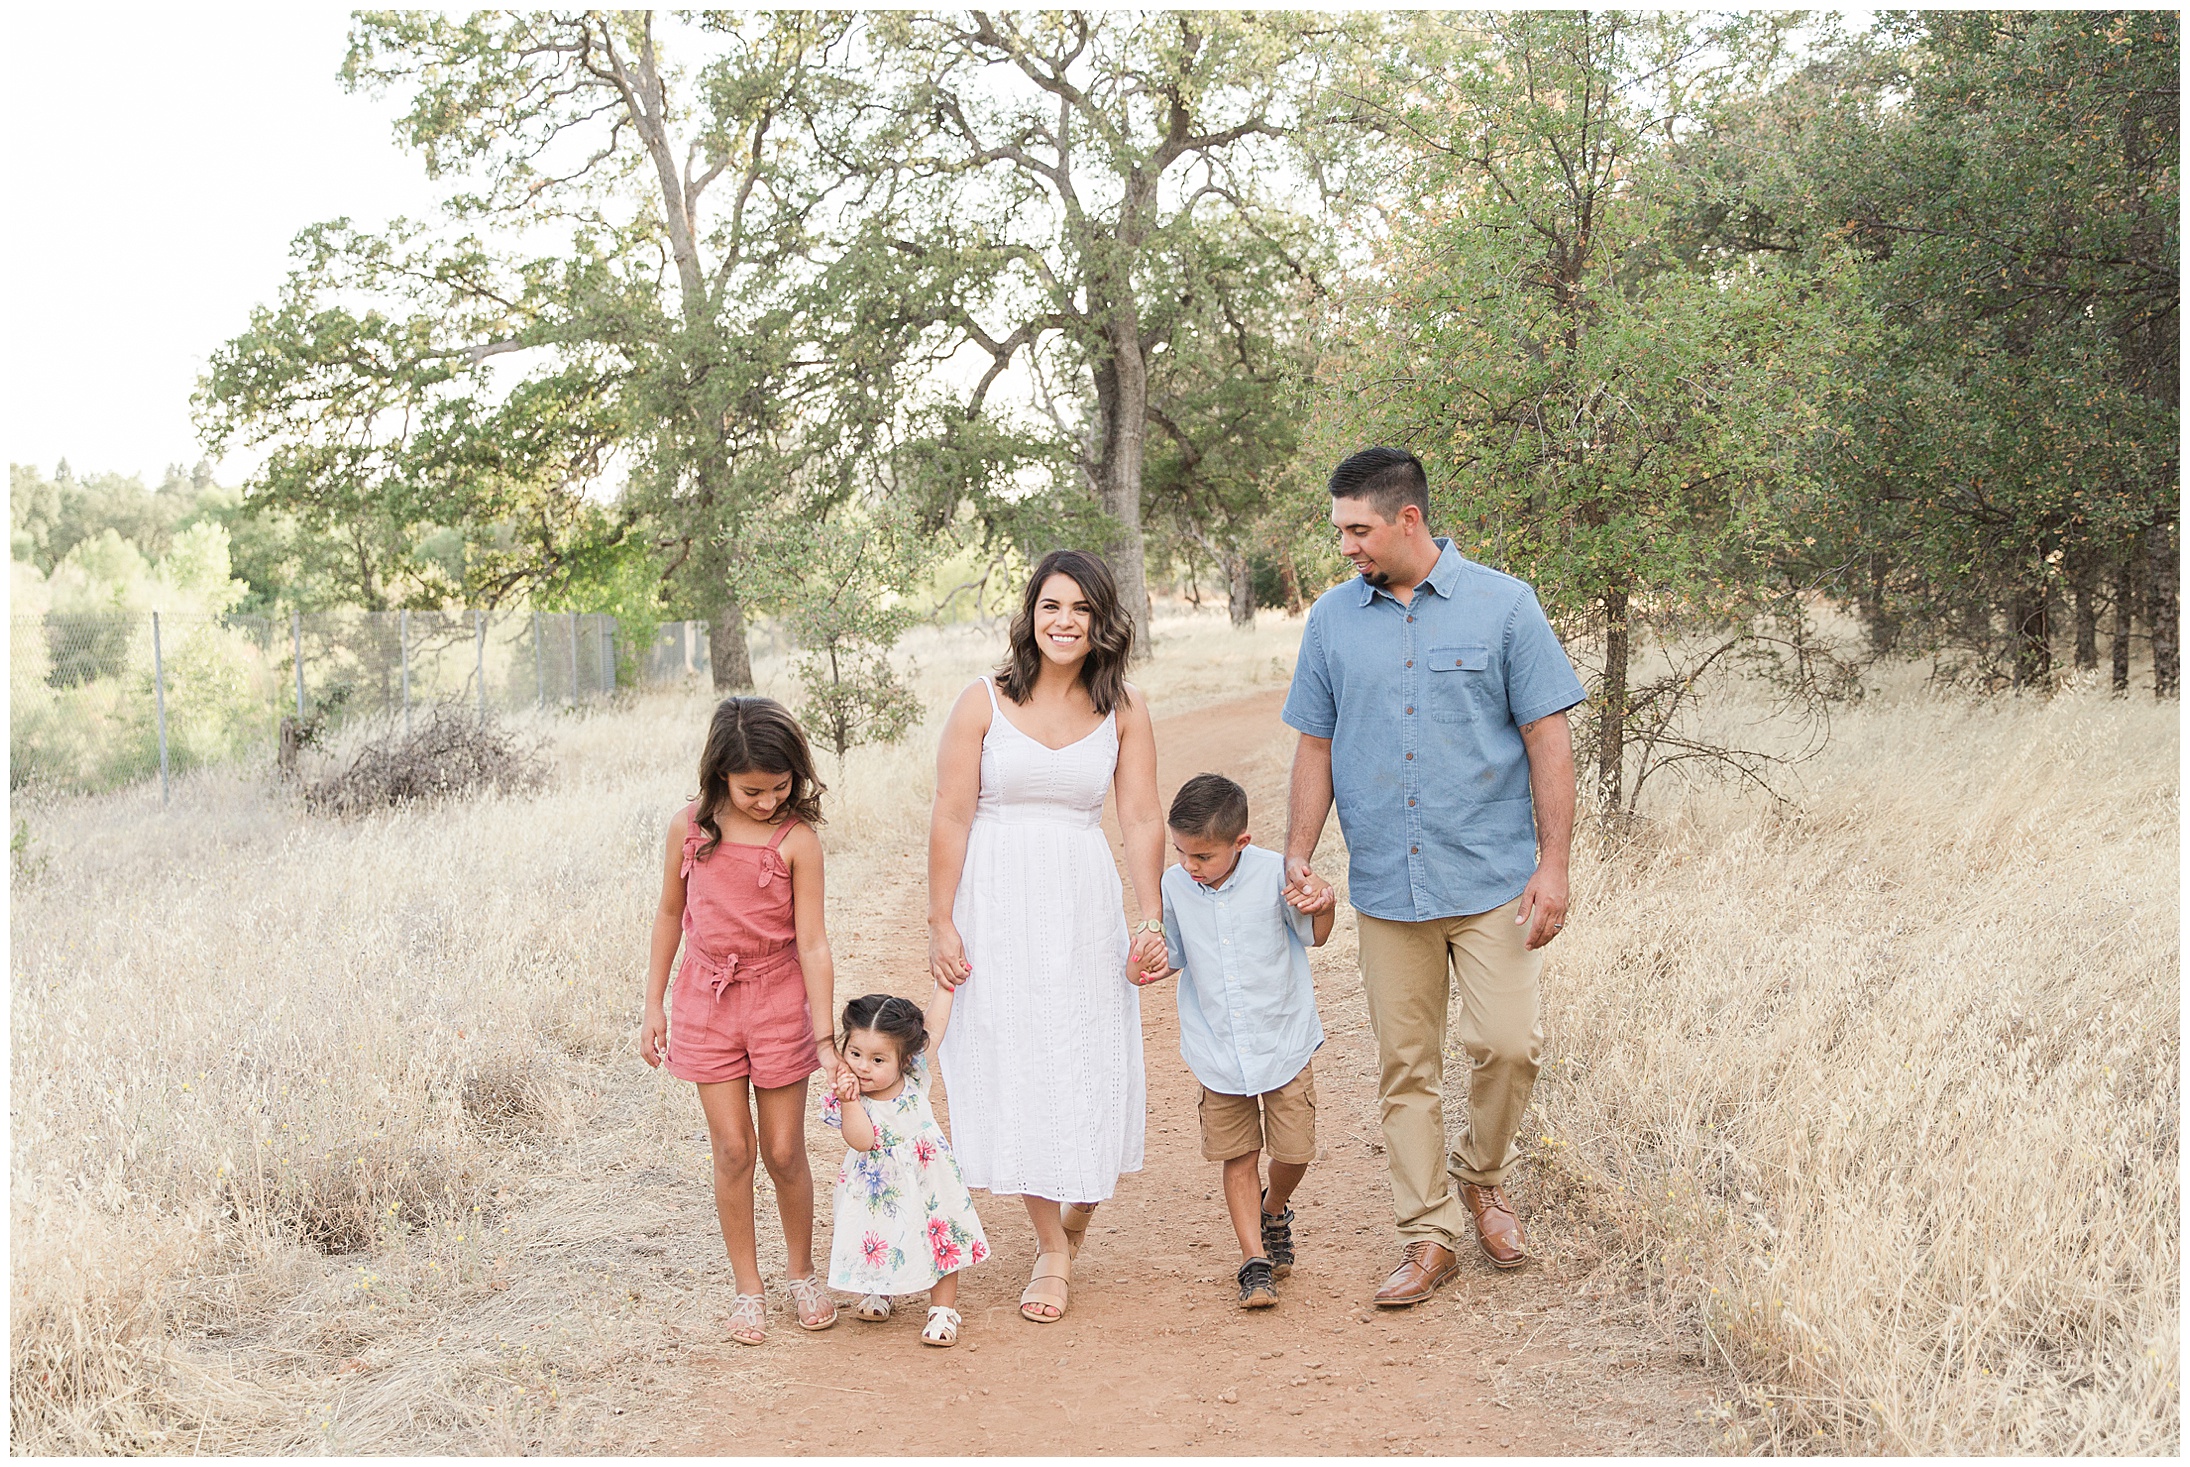 Upper Bidwell Park Chico CA Family Session Light Pastels,